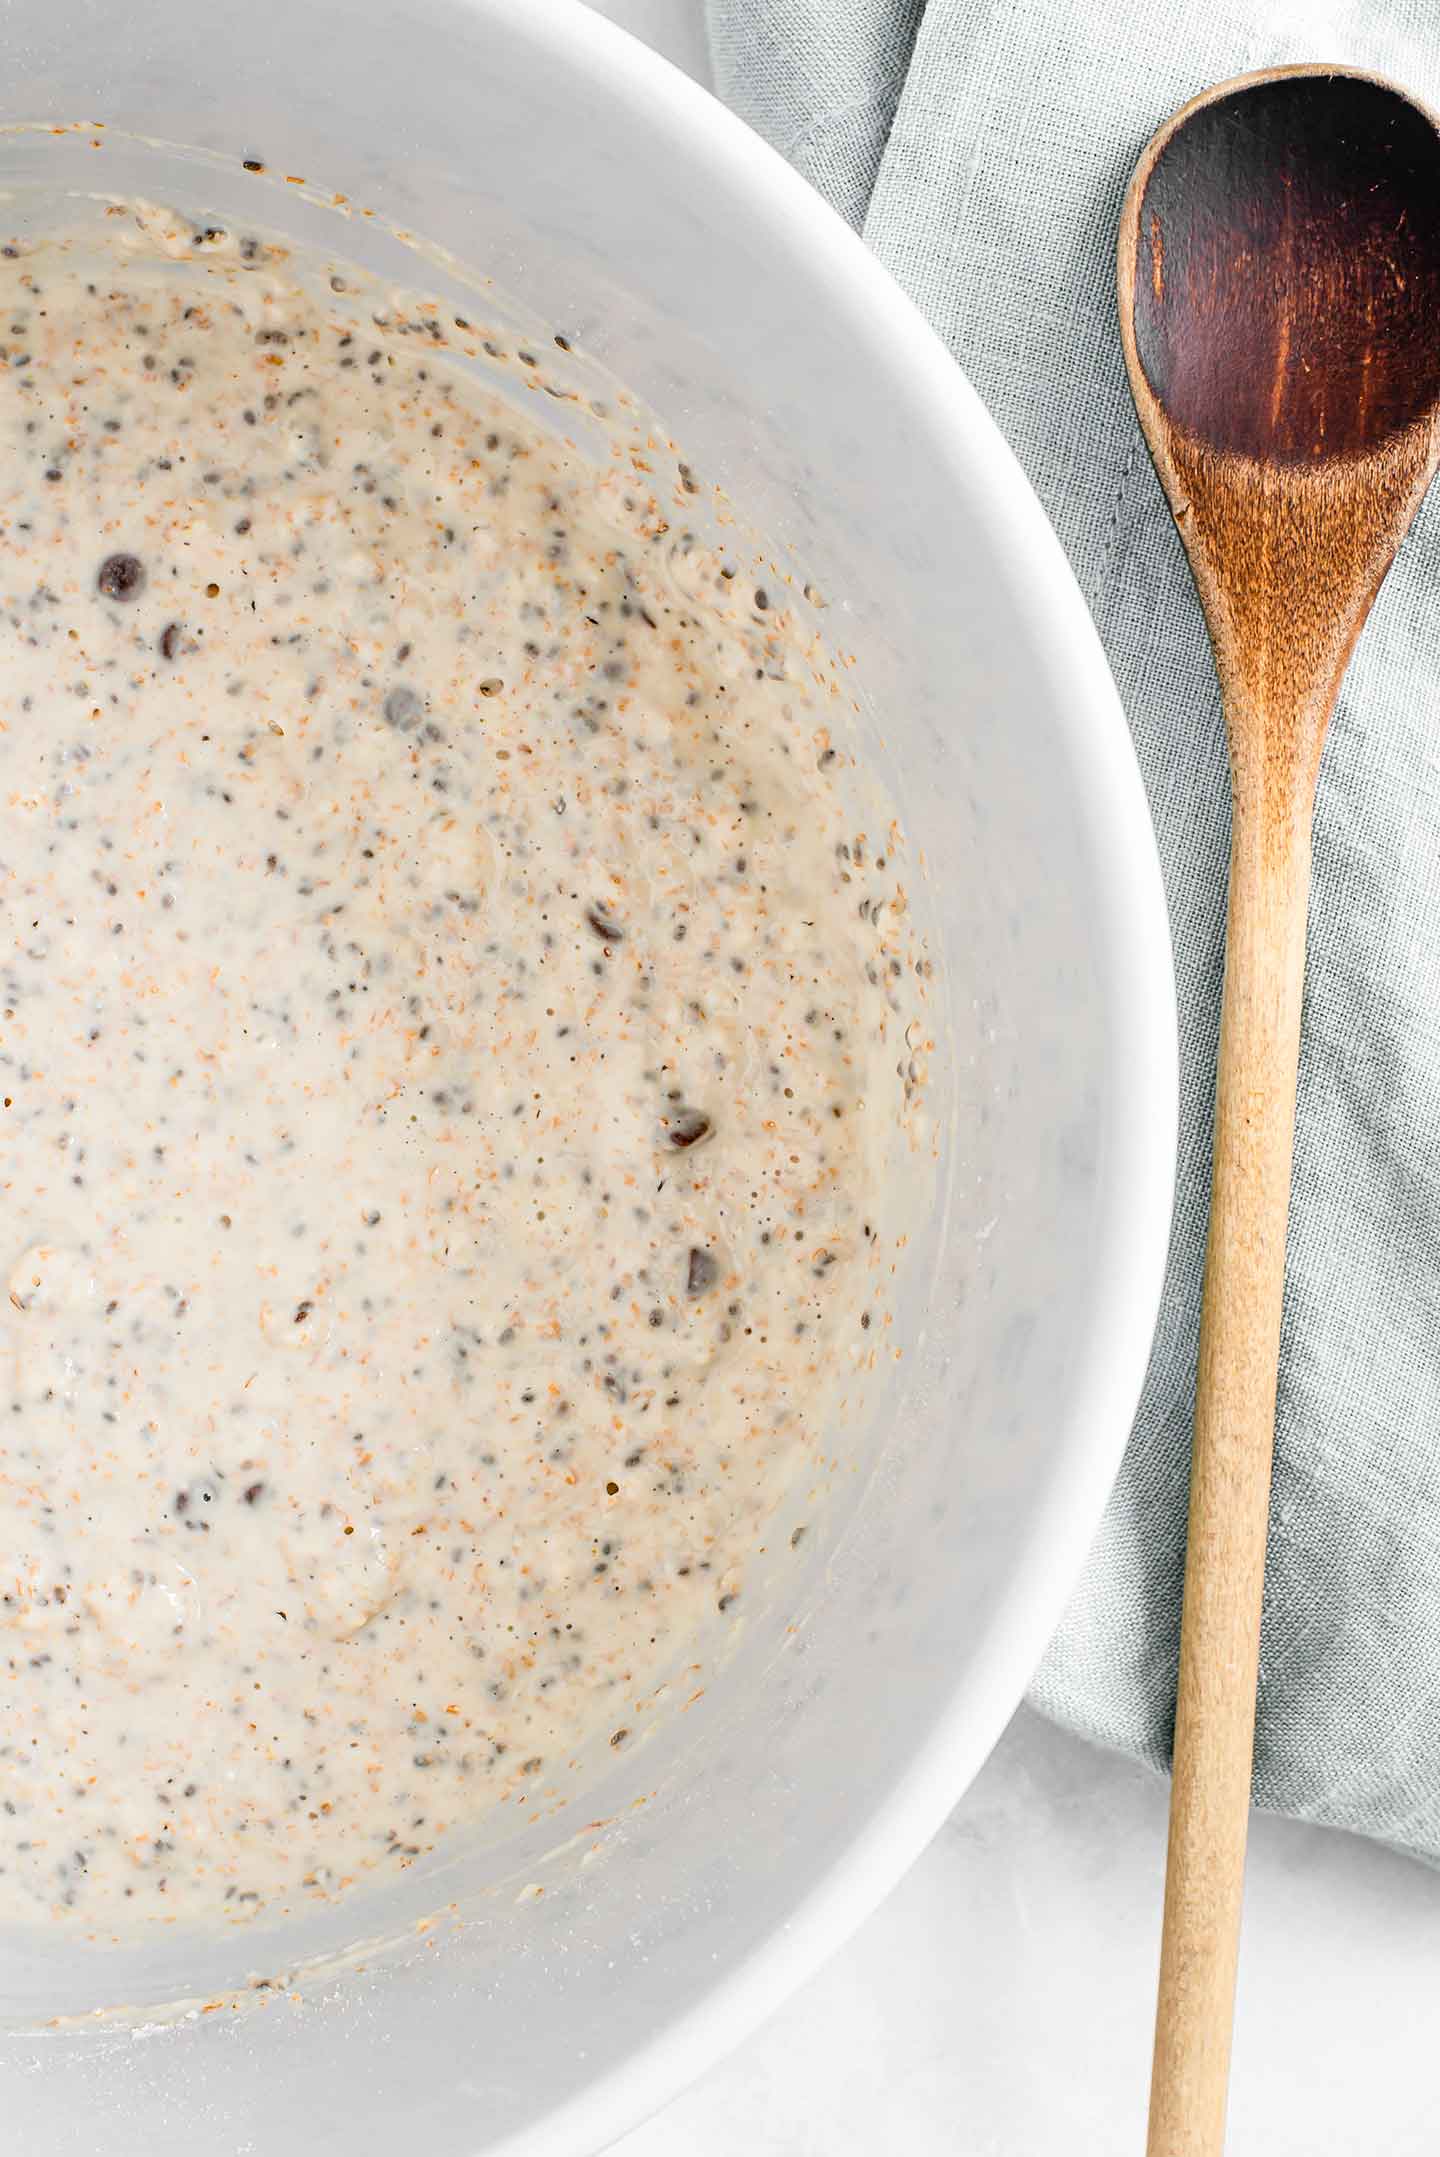 Pancake batter fills a large bowl. Chia seeds and chocolate chips are visible in the slightly lumpy, bubbly batter. A wooden spoon lays beside the bowl.